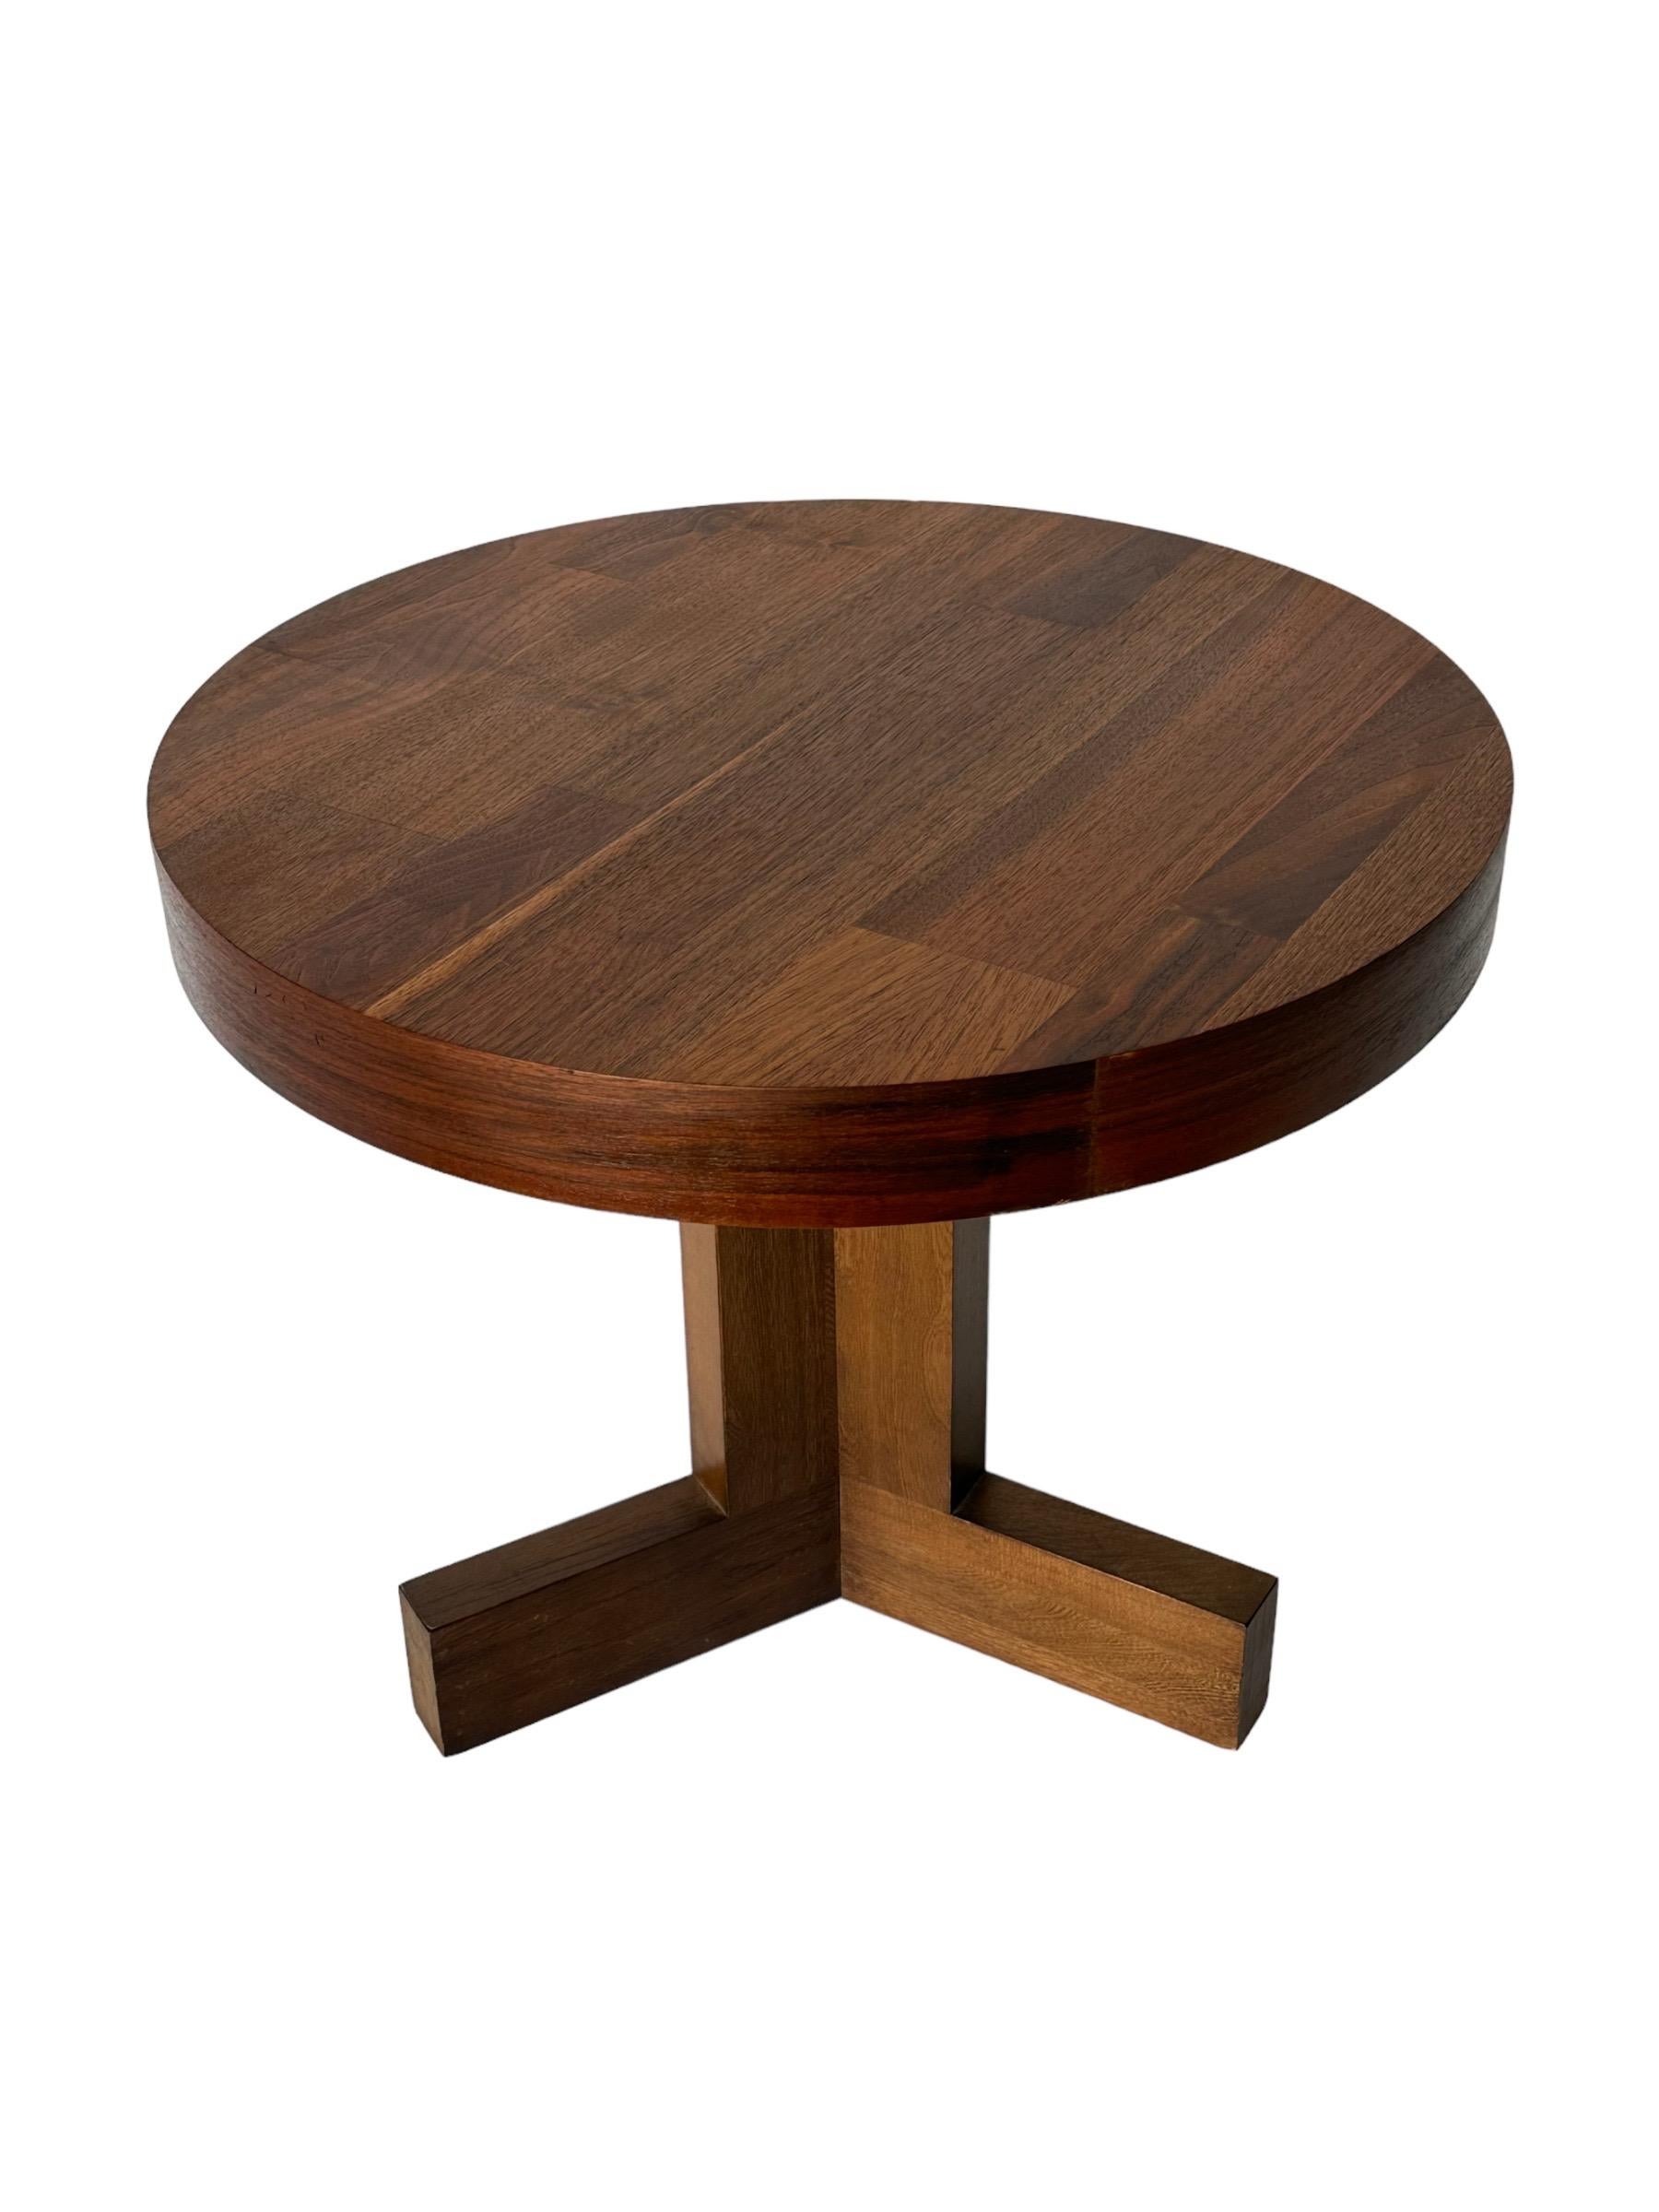 Uncommon round Lane side table on tripod base. Elegant and simple, yet solid and impactful in its design. Walnut top and banded edge have been cleaned and oiled to highlight warm nuance in tones and grain pattern. Large enough for use as a single